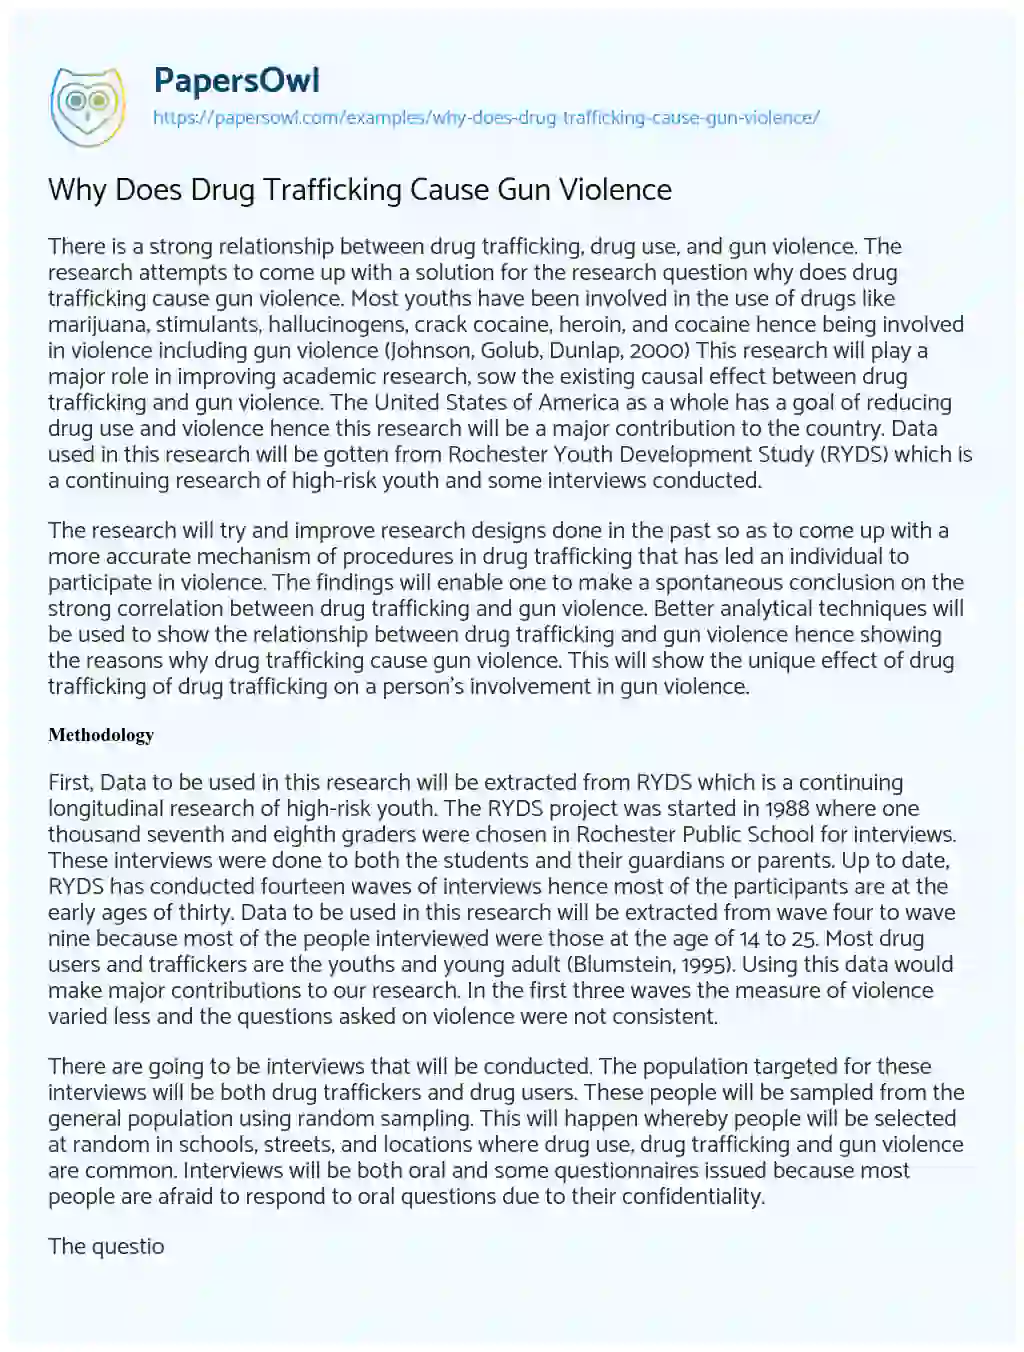 Essay on Why does Drug Trafficking Cause Gun Violence